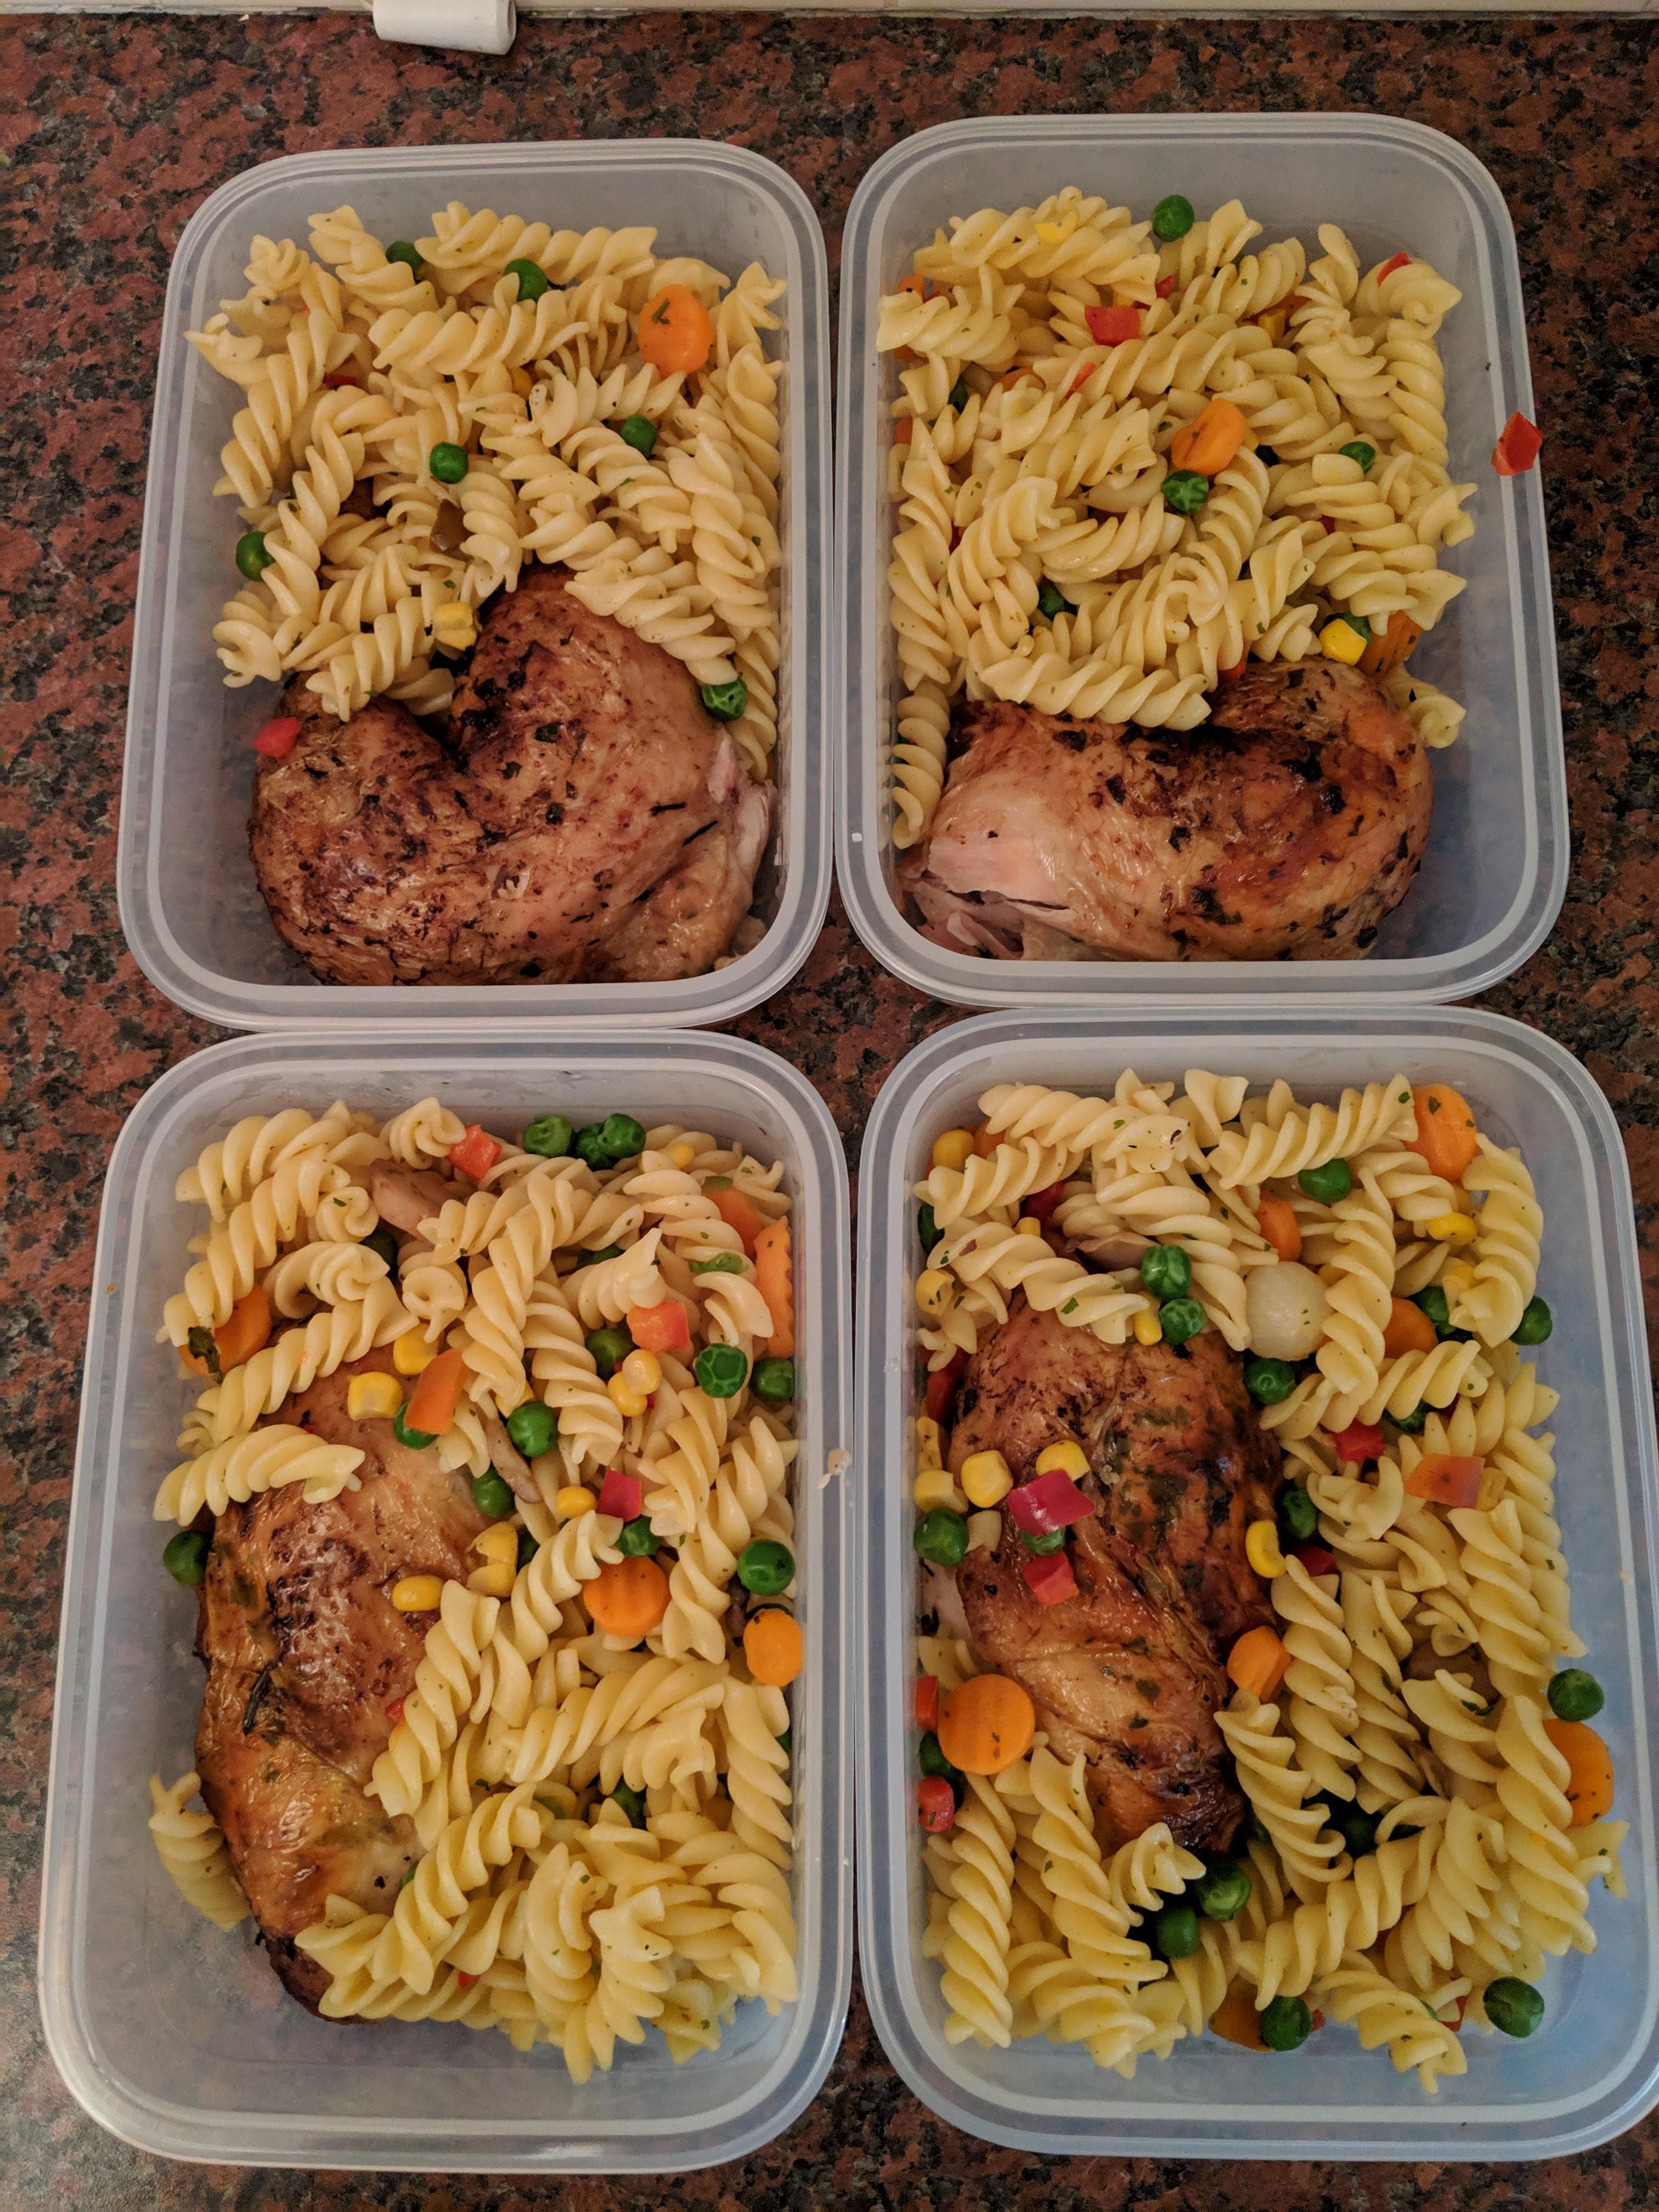 19+ Meal Prep Ideas to Build Your Ideal Body & Finance * Gallery Sepedaku - 19+ Meal Prep Ideas to Build Your Ideal Body & Finance * Gallery Sepedaku -   16 fitness Meals chicken ideas